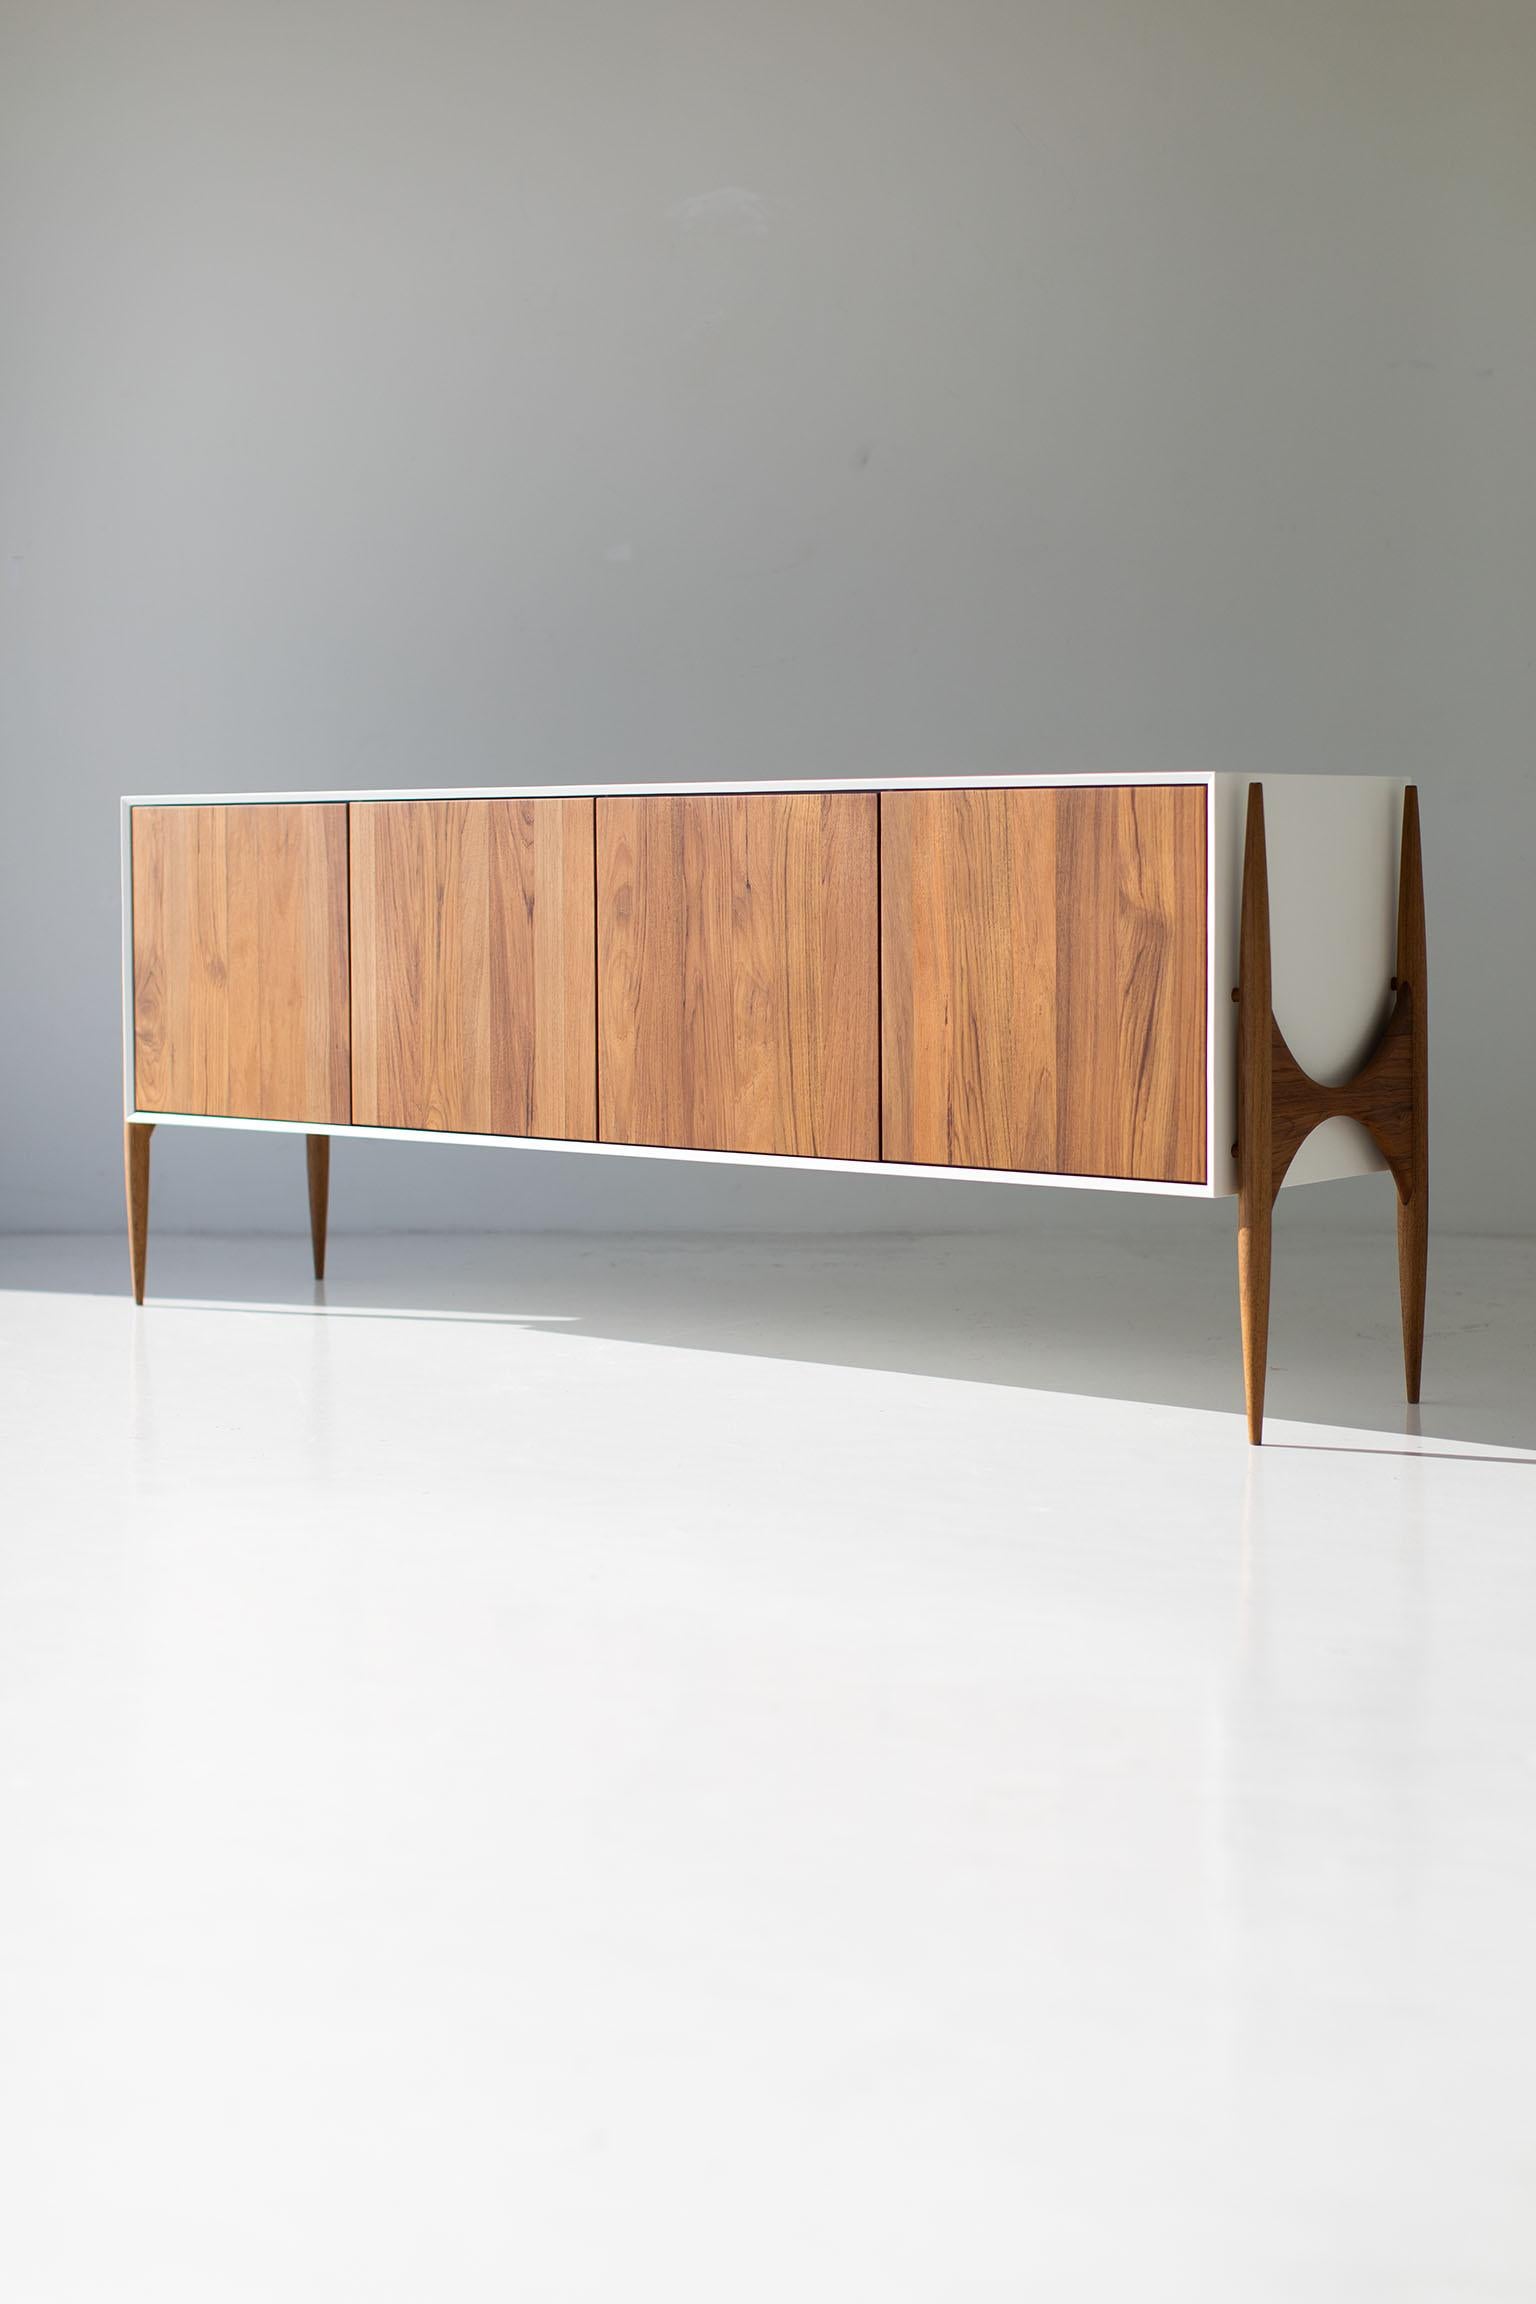 CraftAssociates Credenzas, Cambre Modern Credenza, Teak

This modern teak credenza from the Cambre Collection for Craft Associates Furniture is expertly crafted. The legs and door fronts are constructed by artisans from solid teak. The frame is